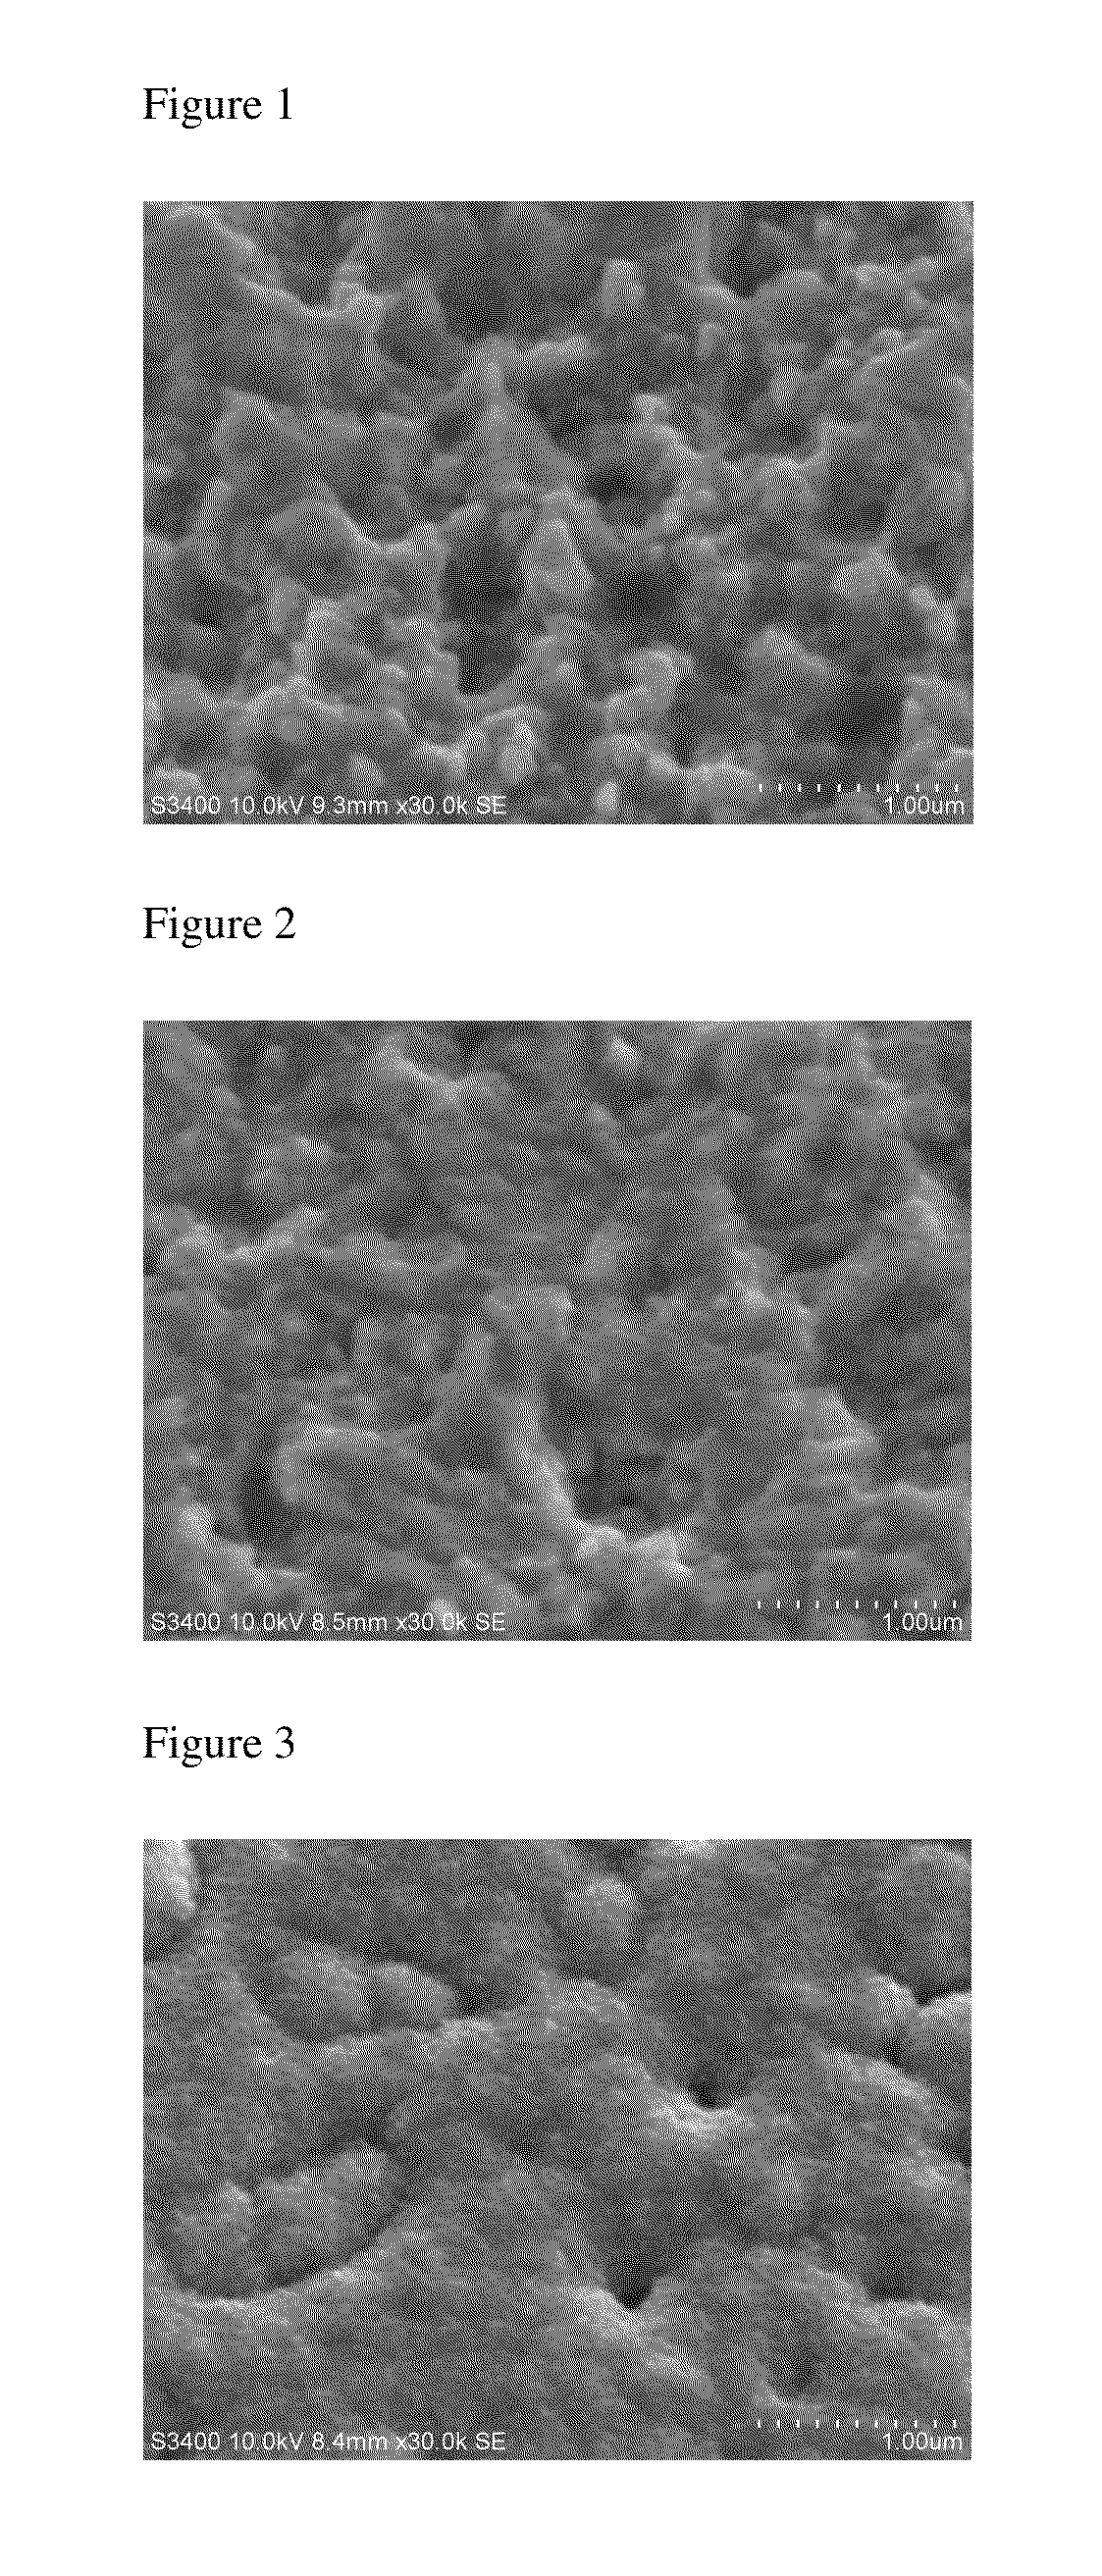 Method for producing printed-wiring board